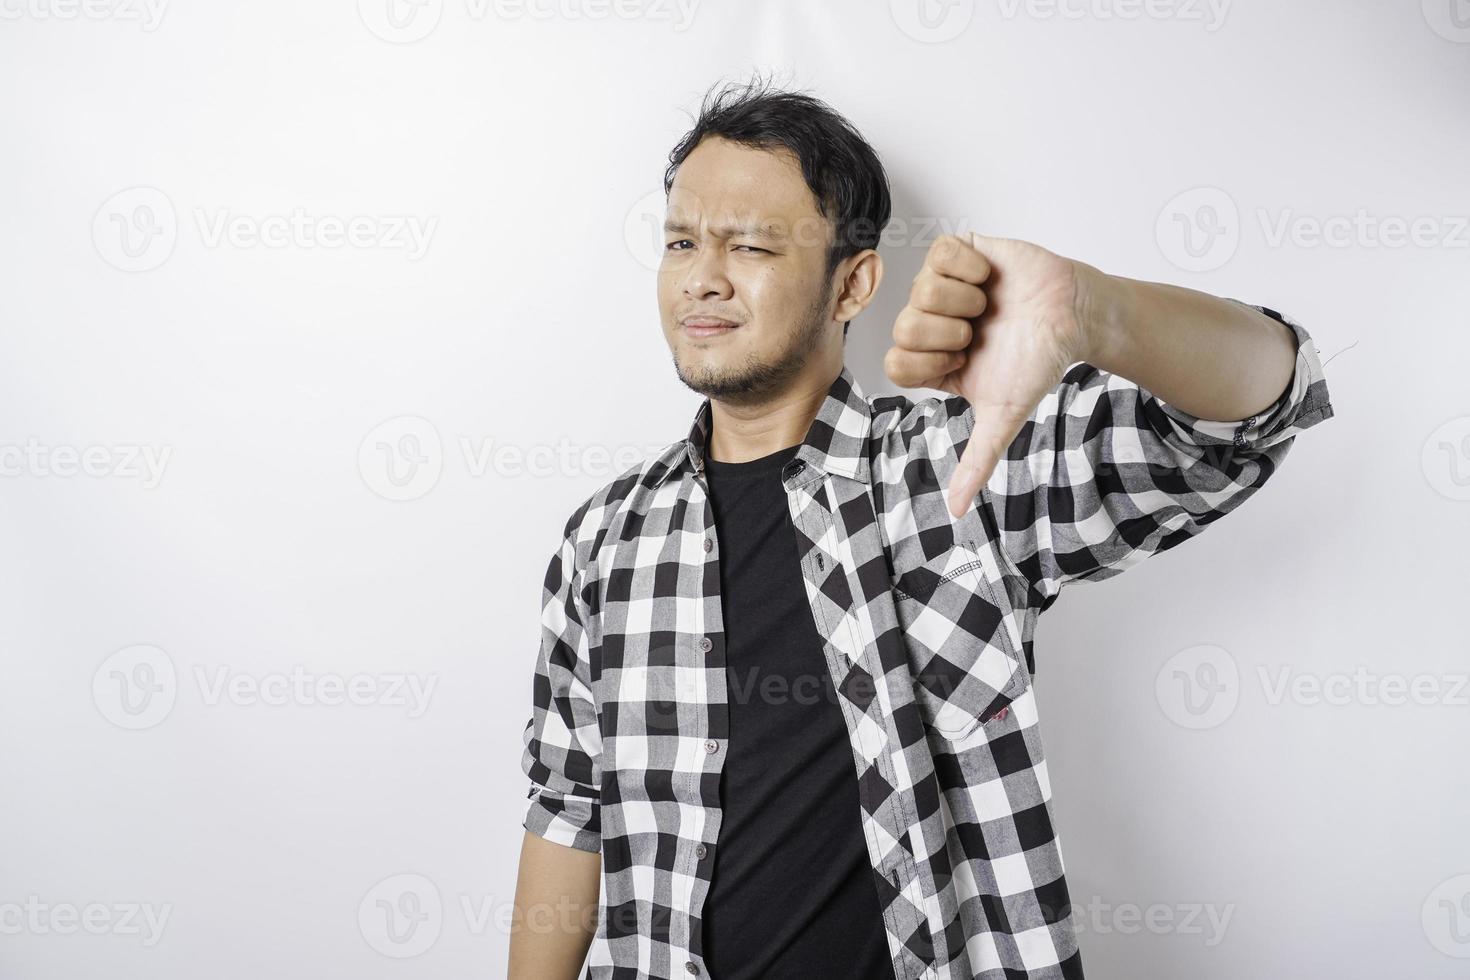 Disappointed Asian man wearing tartan short gives thumbs down hand gesture of approval, isolated by white background photo